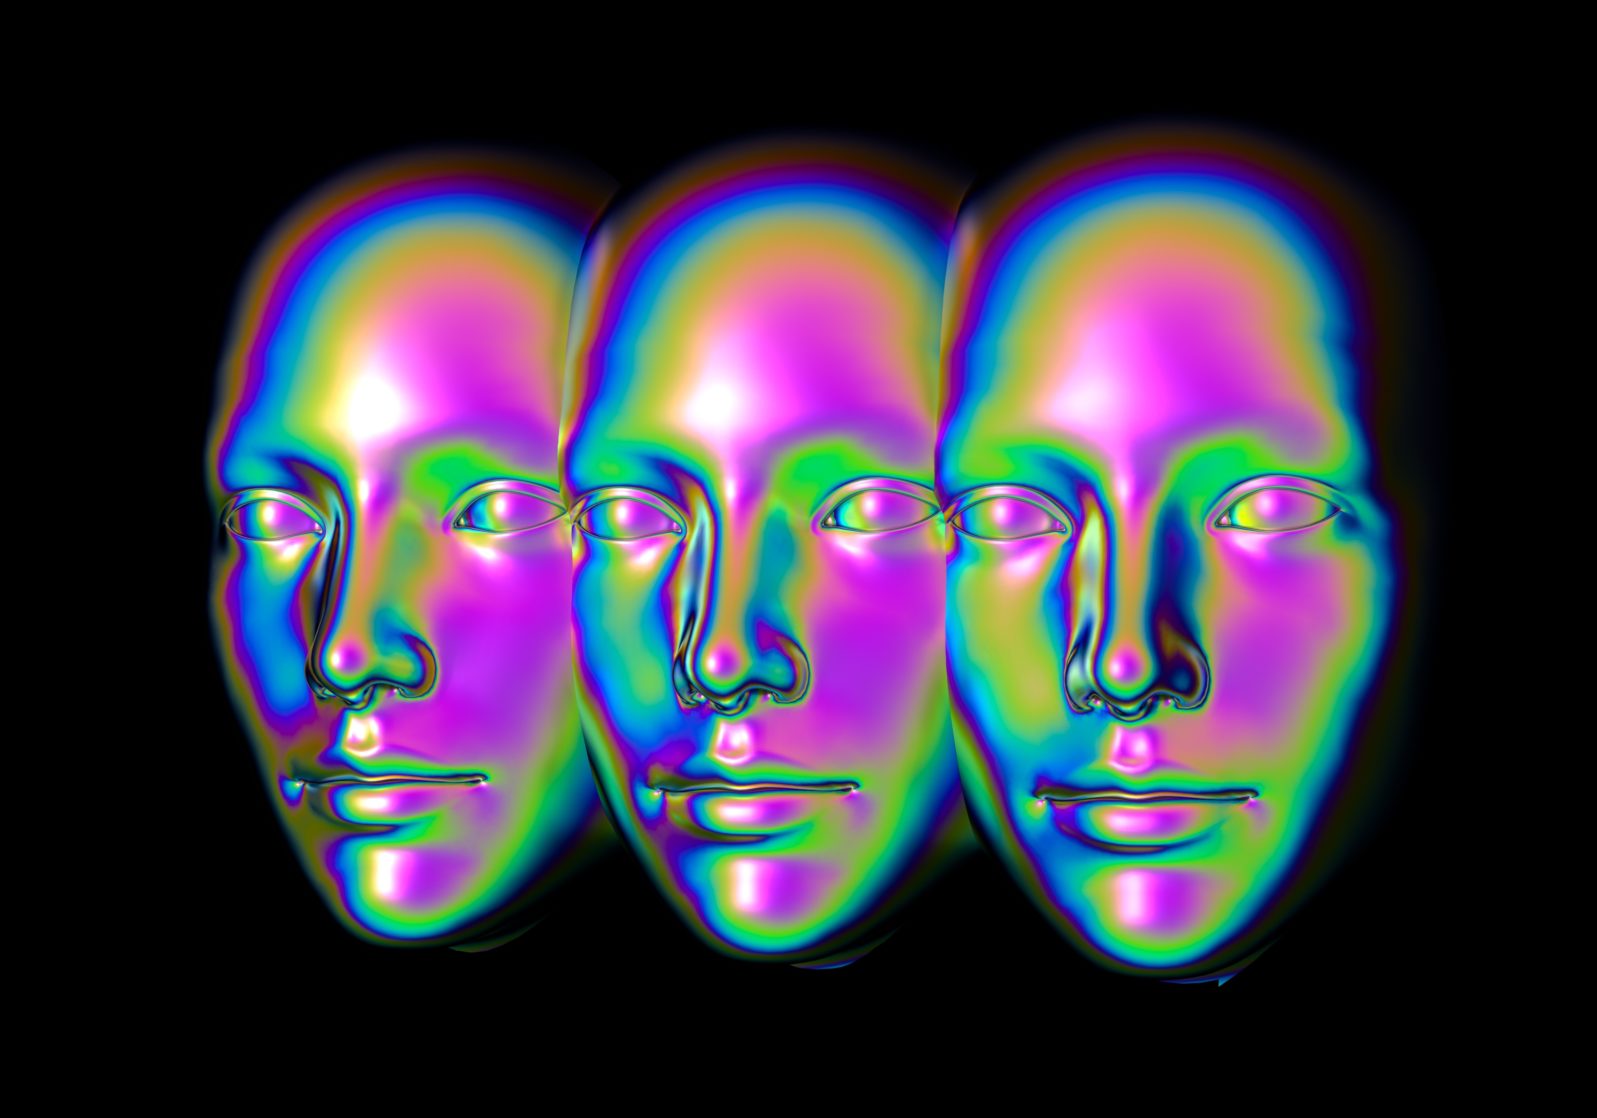 Surreal 3d illustration of multiple faces in a wall. Concept of post-human and transhumanism ideas.